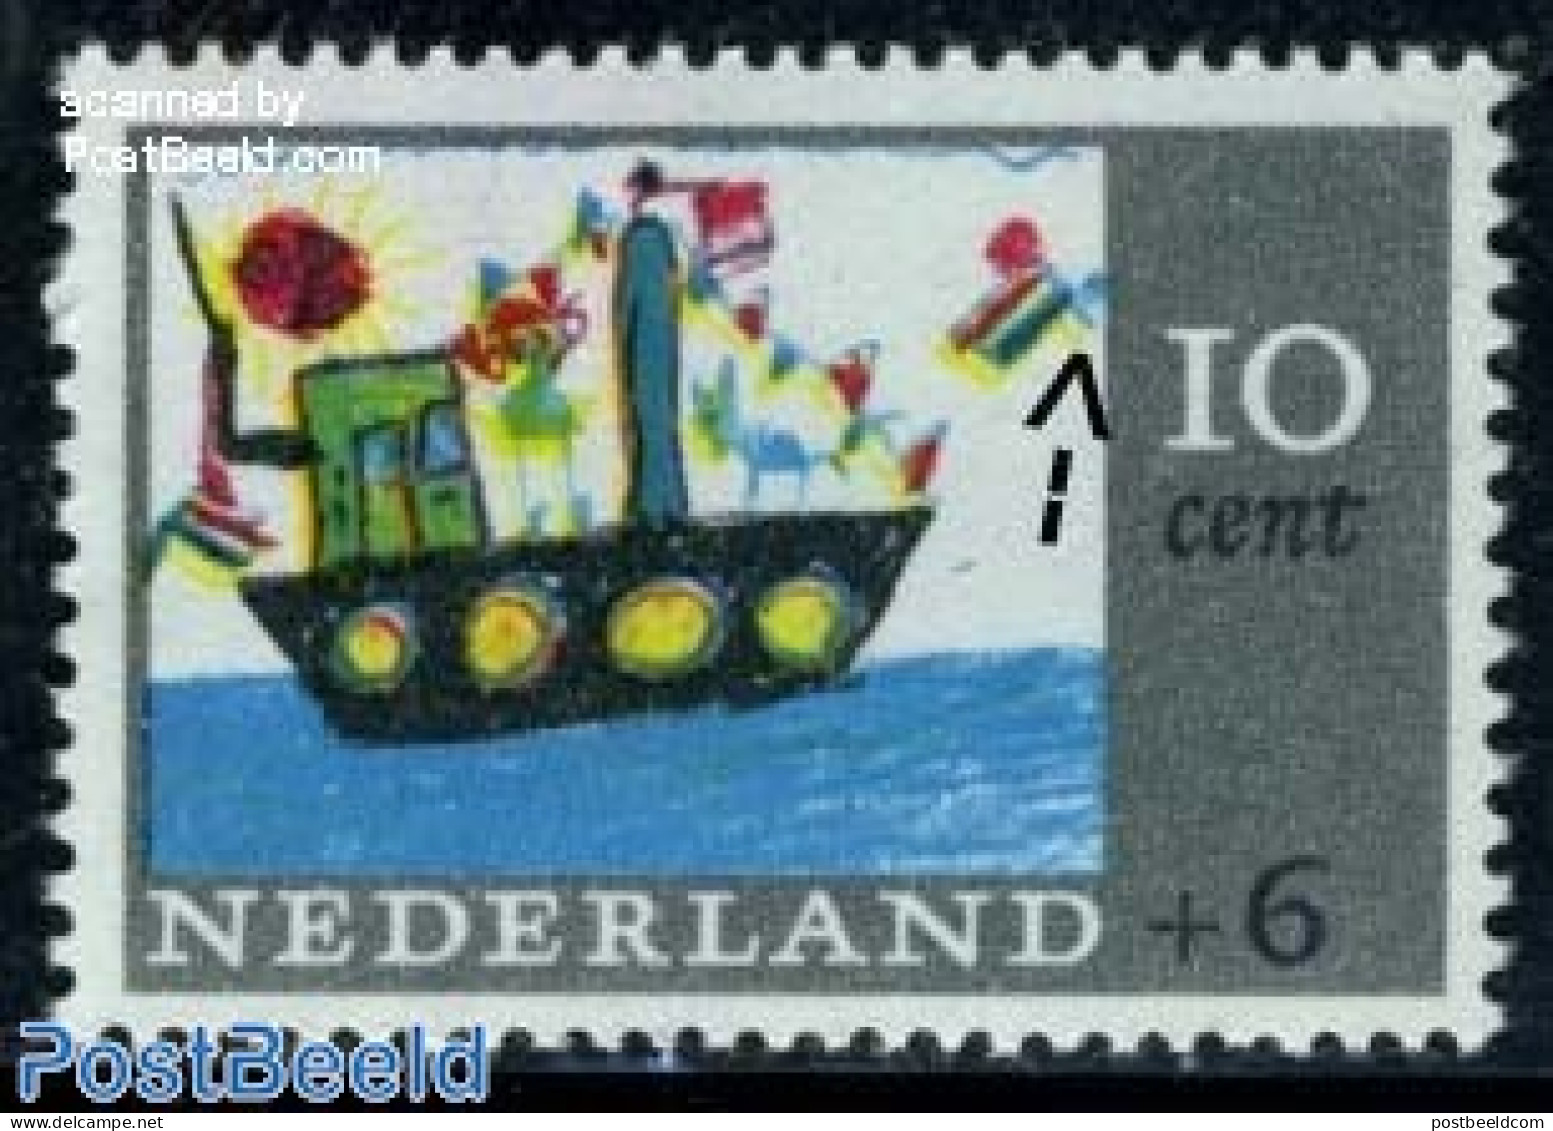 Netherlands 1965 Plate Flaw, 10+6c, Green Spot Right Of Right Flag, Mint NH, Transport - Ships And Boats - Children Dr.. - Unused Stamps